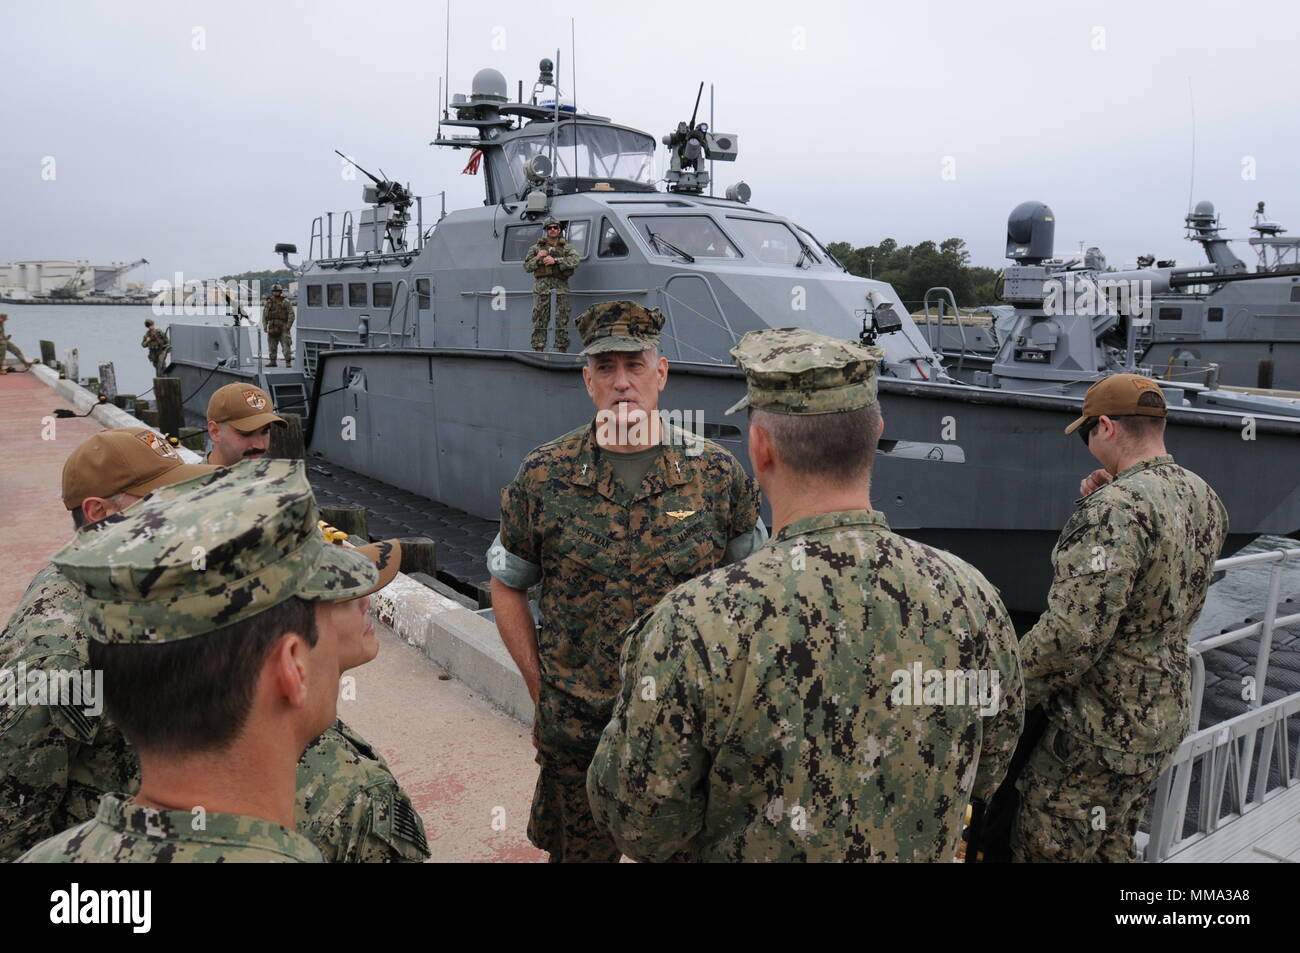 VIRGINIA BEACH, VA (September 26, 2017) - Maj. Gen. David Coffman, director of Expeditionary Warfare, Office of the Chief of Naval Operations, meets with staff of Coastal Riverine Group 2 (CRG 2) prior to a tour of the Mark VI patrol boat during a visit to Navy Expeditionary Combat Command (NECC).  NECC organizes, mans, trains, equips and sustains Navy Expeditionary Combat Forces to execute combat, combat support, and combat service support missions across the full spectrum of naval, joint, and combined operations. (U.S. Navy photo by Chief Mass Communication Specialist Edward Kessler/Released Stock Photo